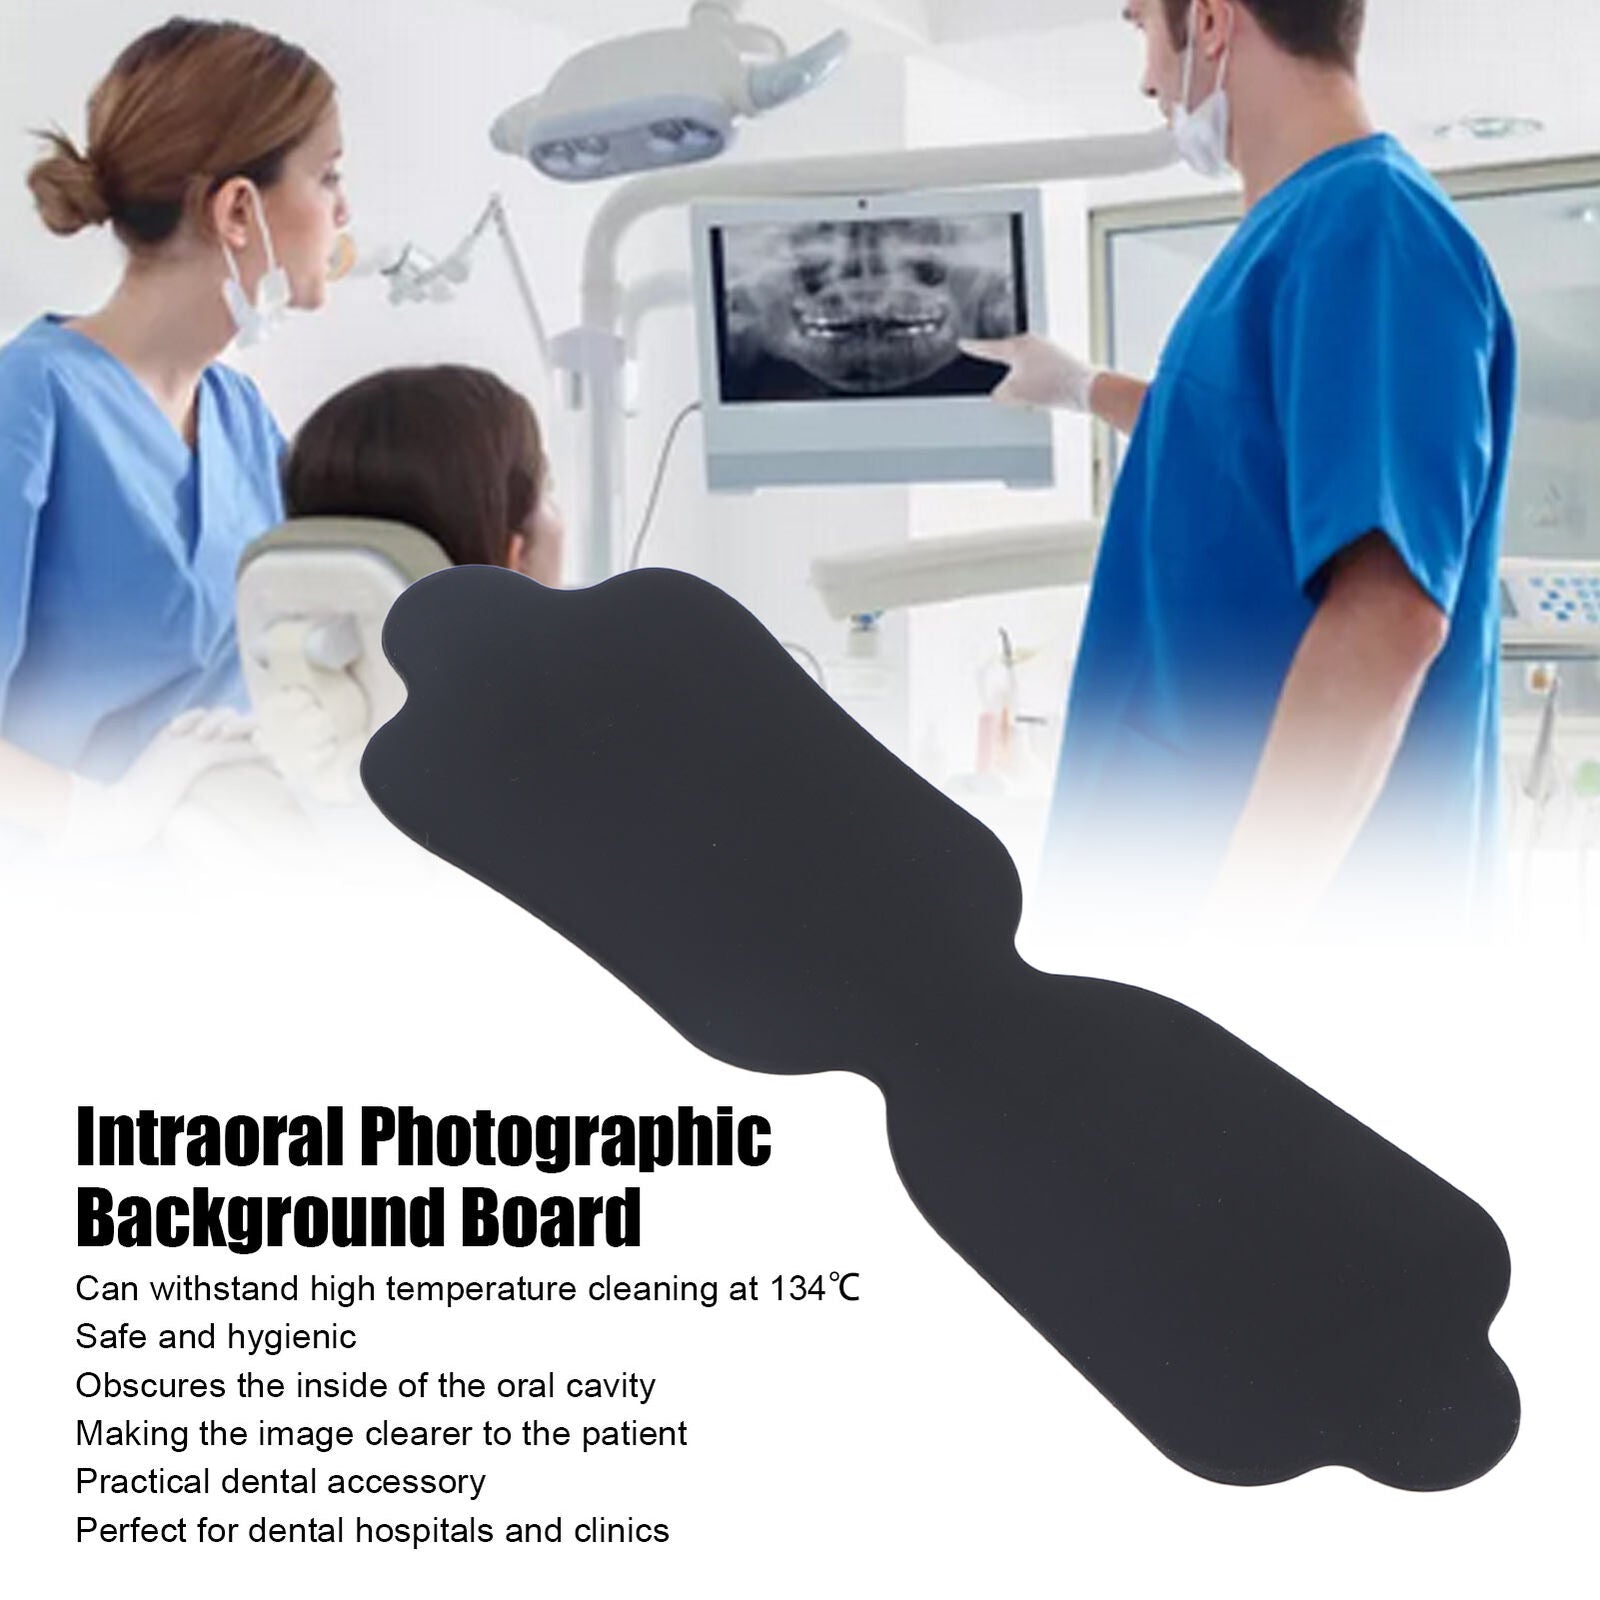 Intraoral Photographic Background Board